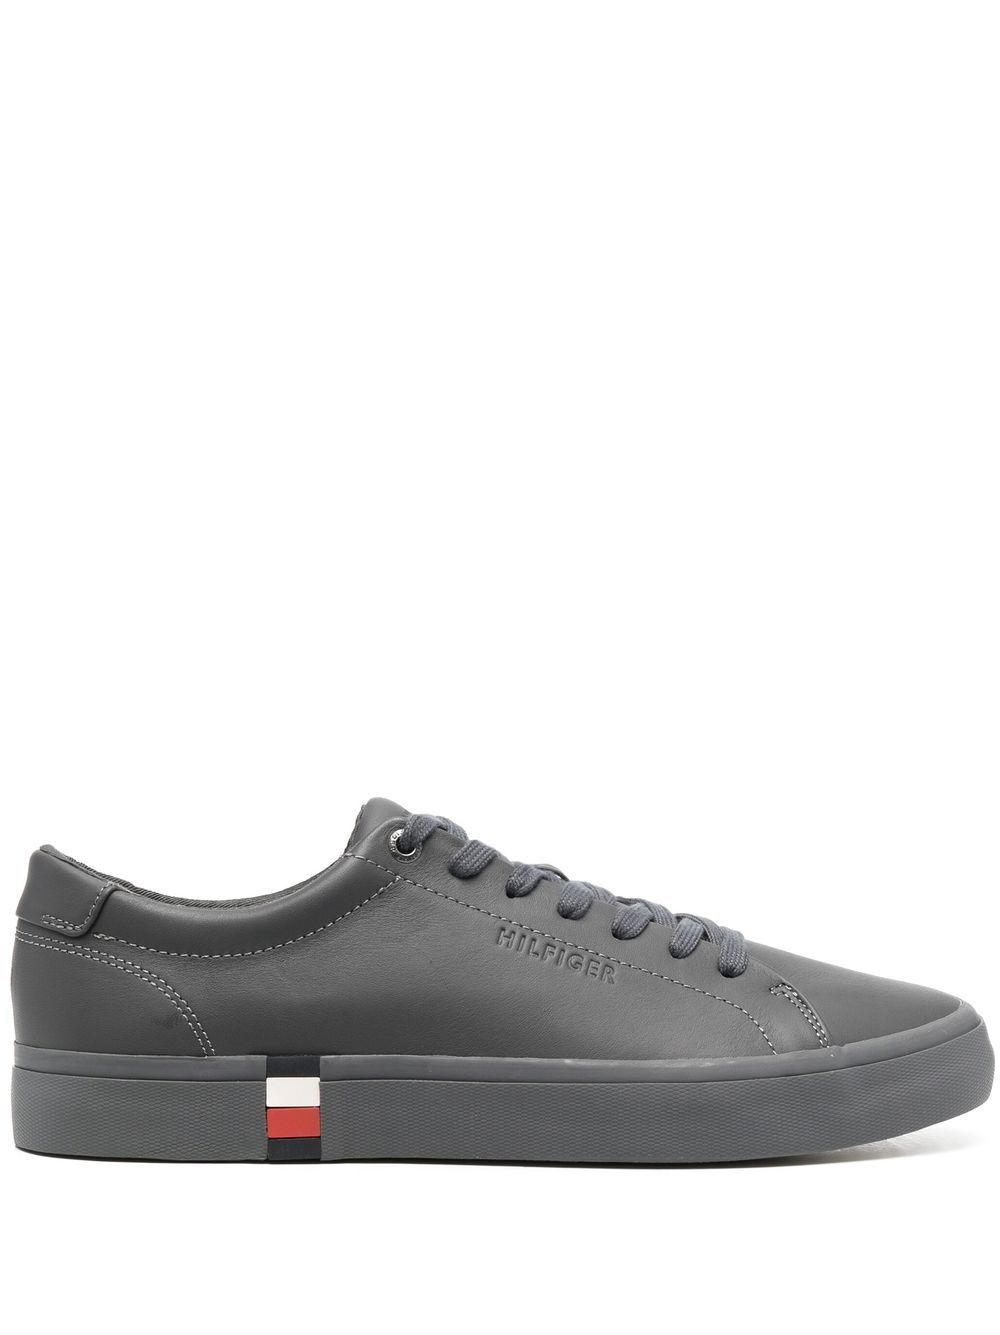 Image 1 of Tommy Hilfiger Modern Vulc Corporate sneakers